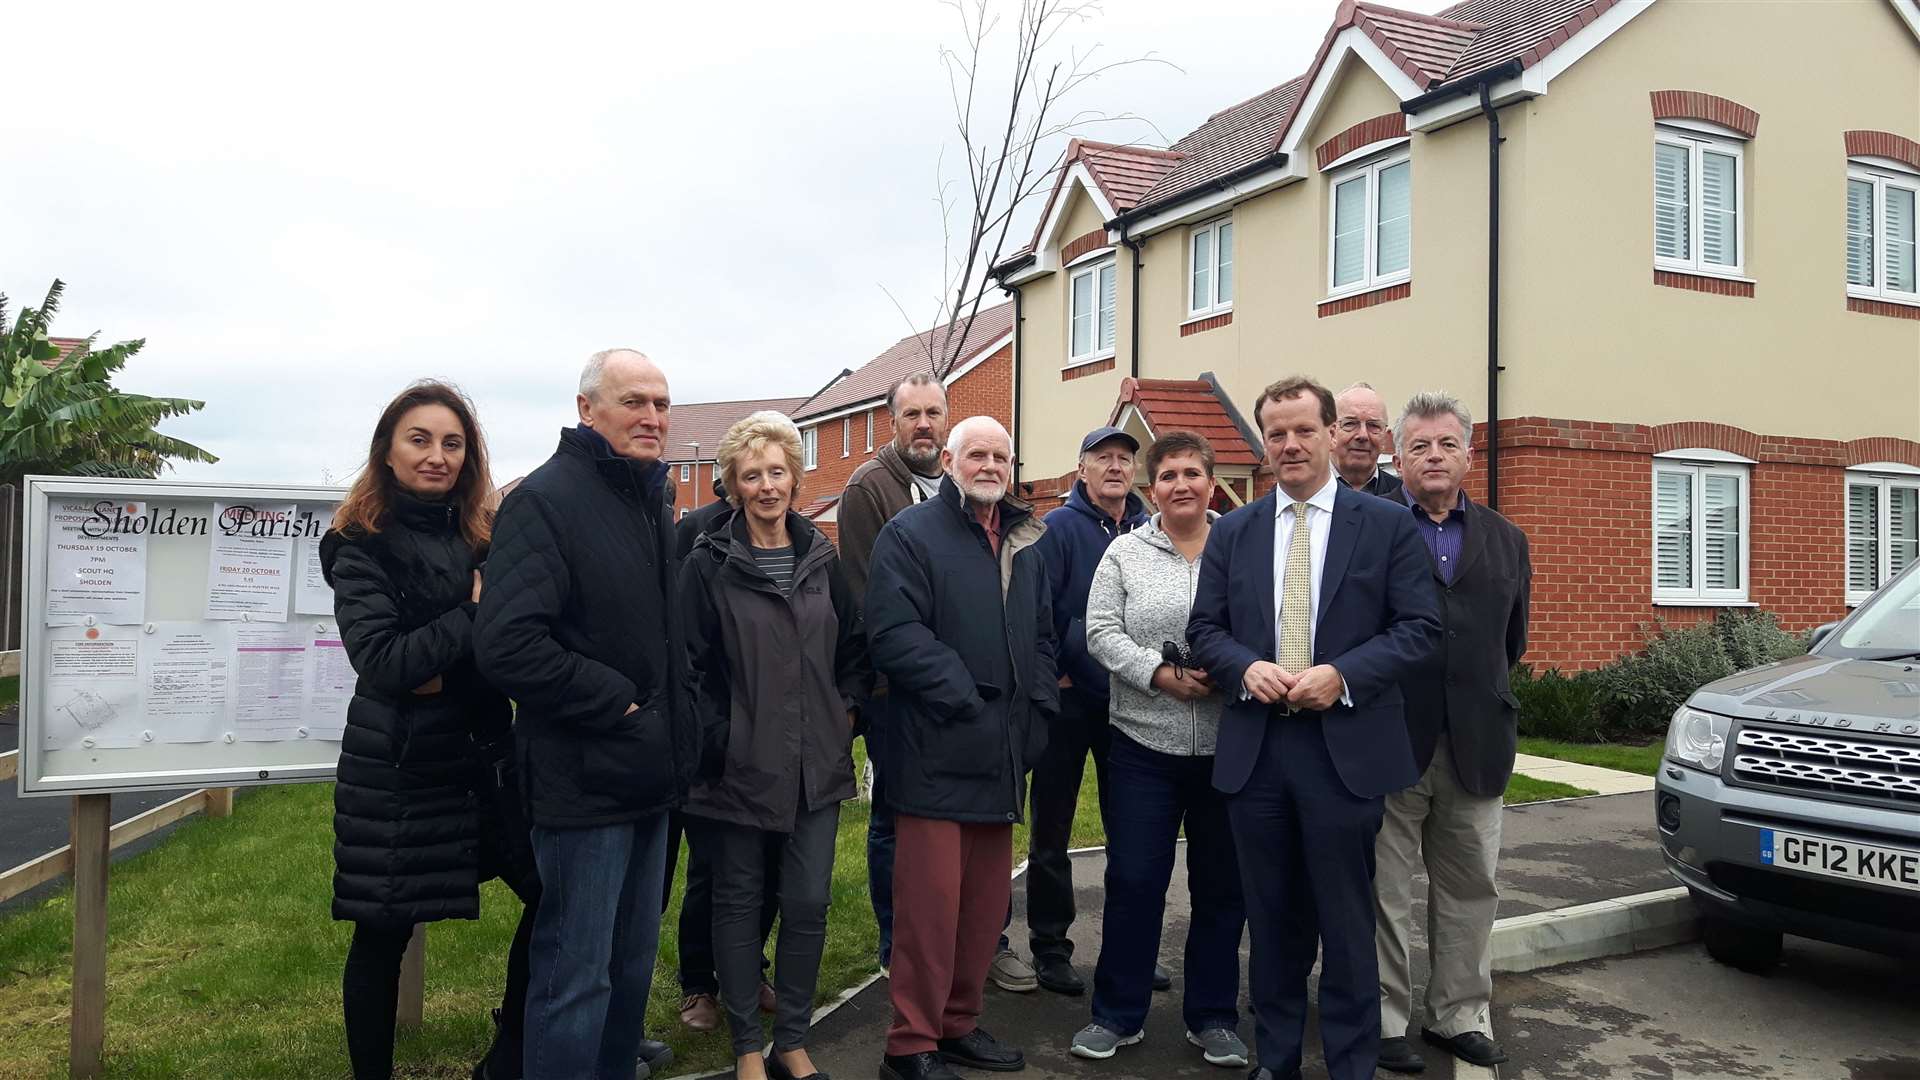 MP Charlie Elphicke met with residents of Hyton Drive to discuss problems with the Persimmon housing development in October 2017